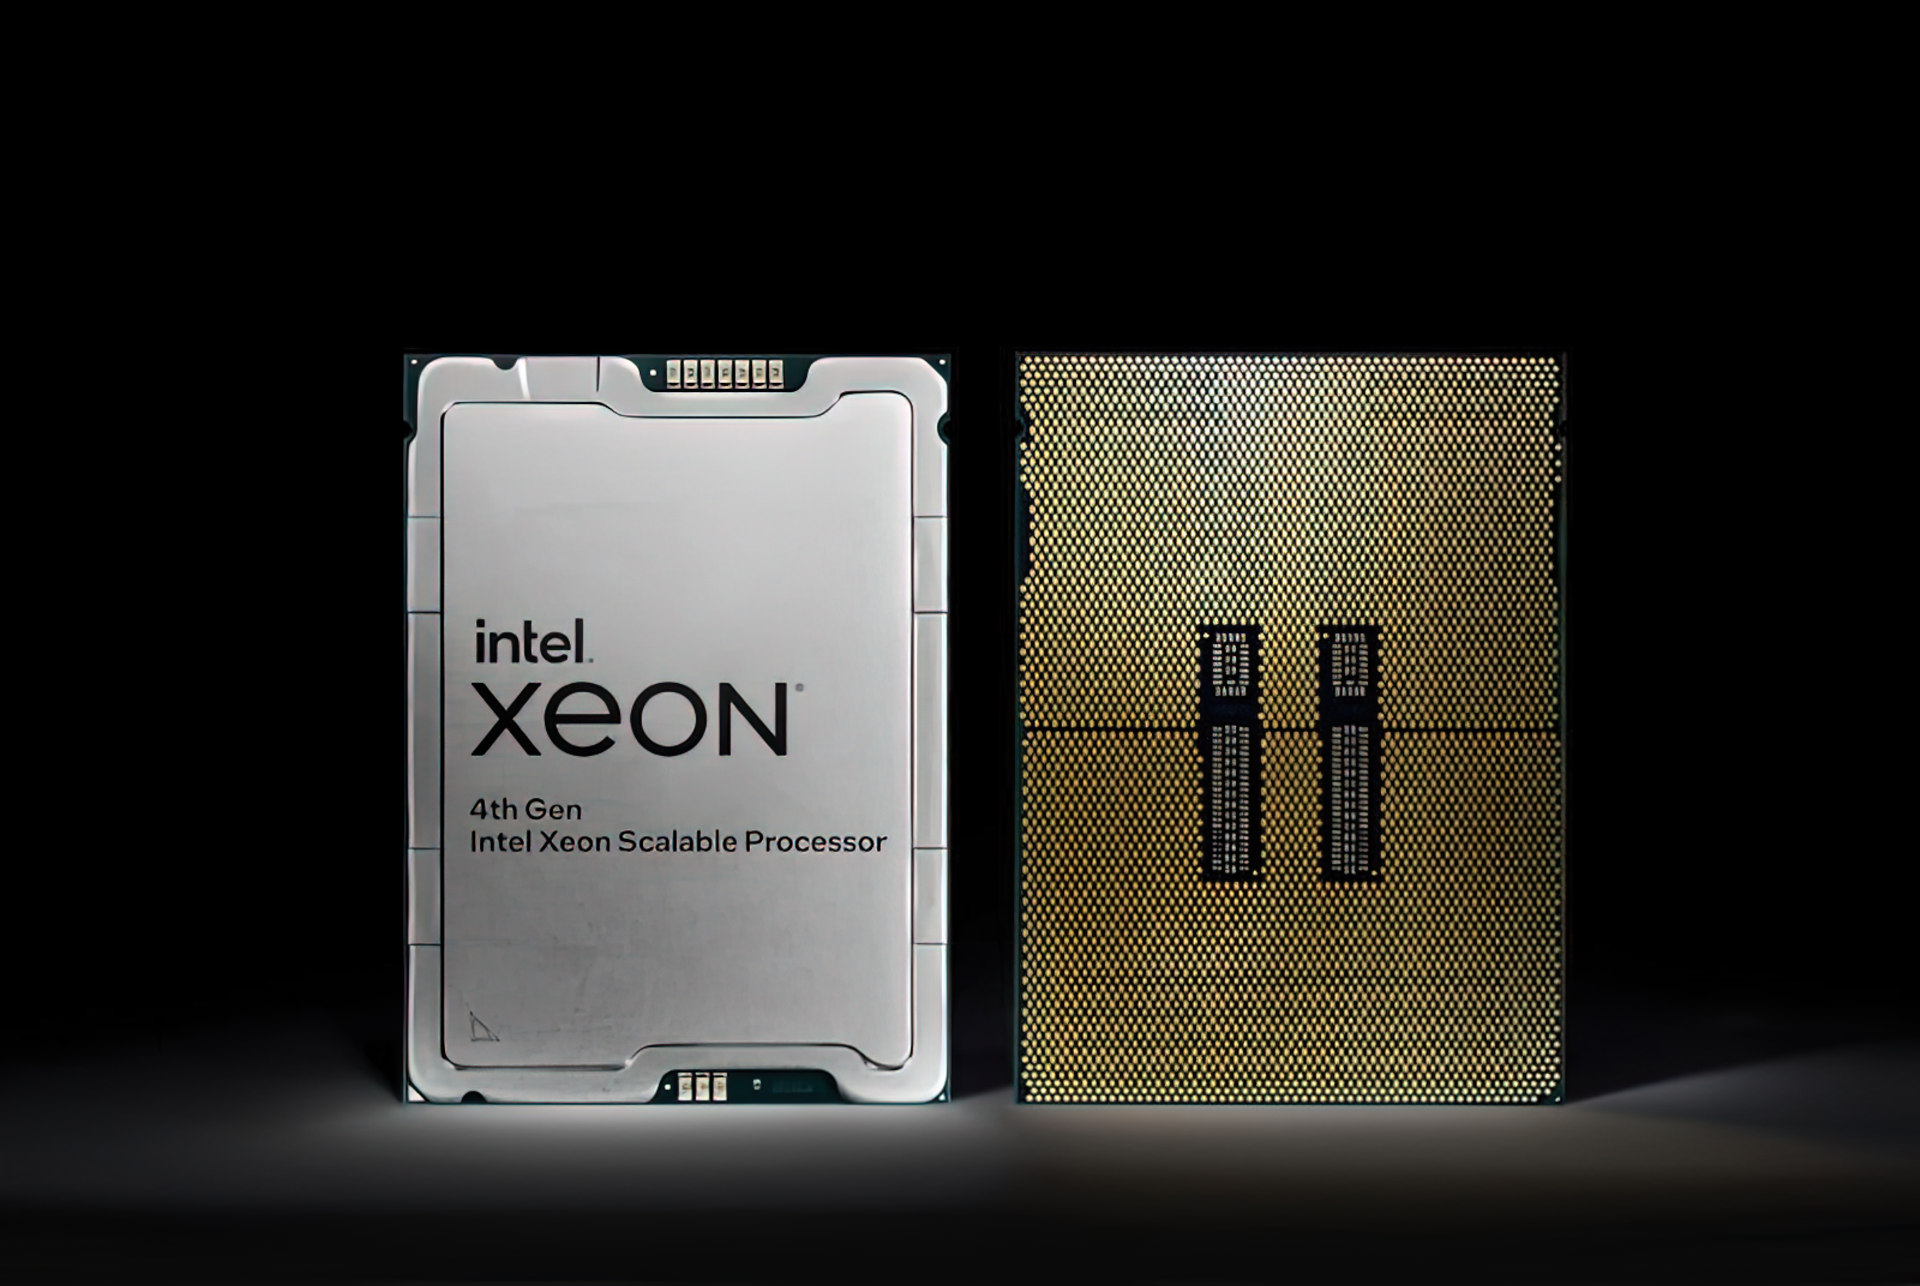 Intel's new Xeon W-3400 and Xeon W-2400 series desktop workstation processors (Sapphire Rapids) with big performance leap and advanced platform features